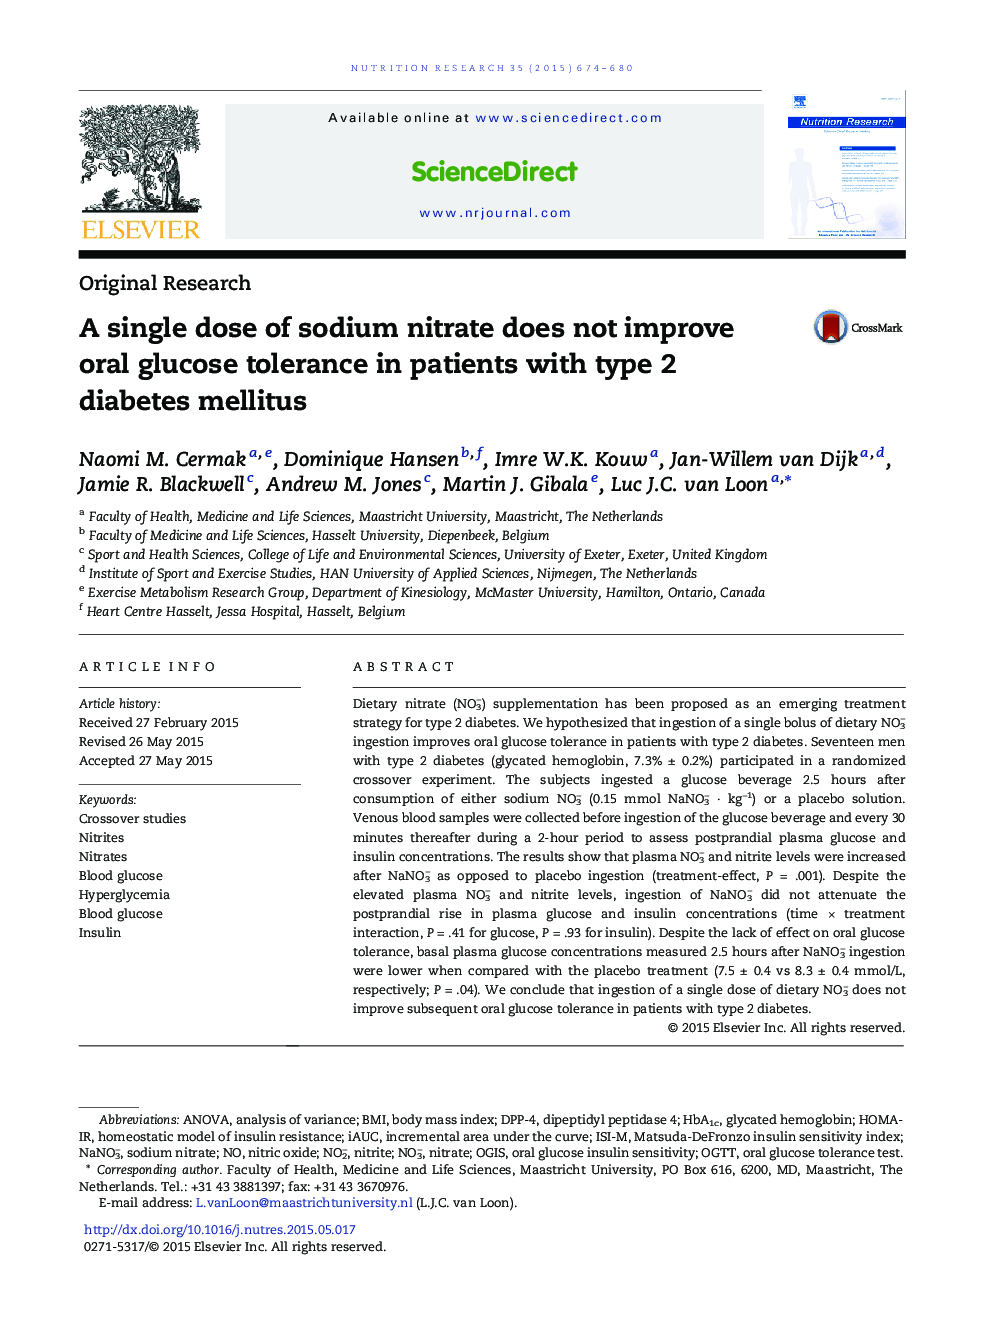 Original ResearchA single dose of sodium nitrate does not improve oral glucose tolerance in patients with type 2 diabetes mellitus